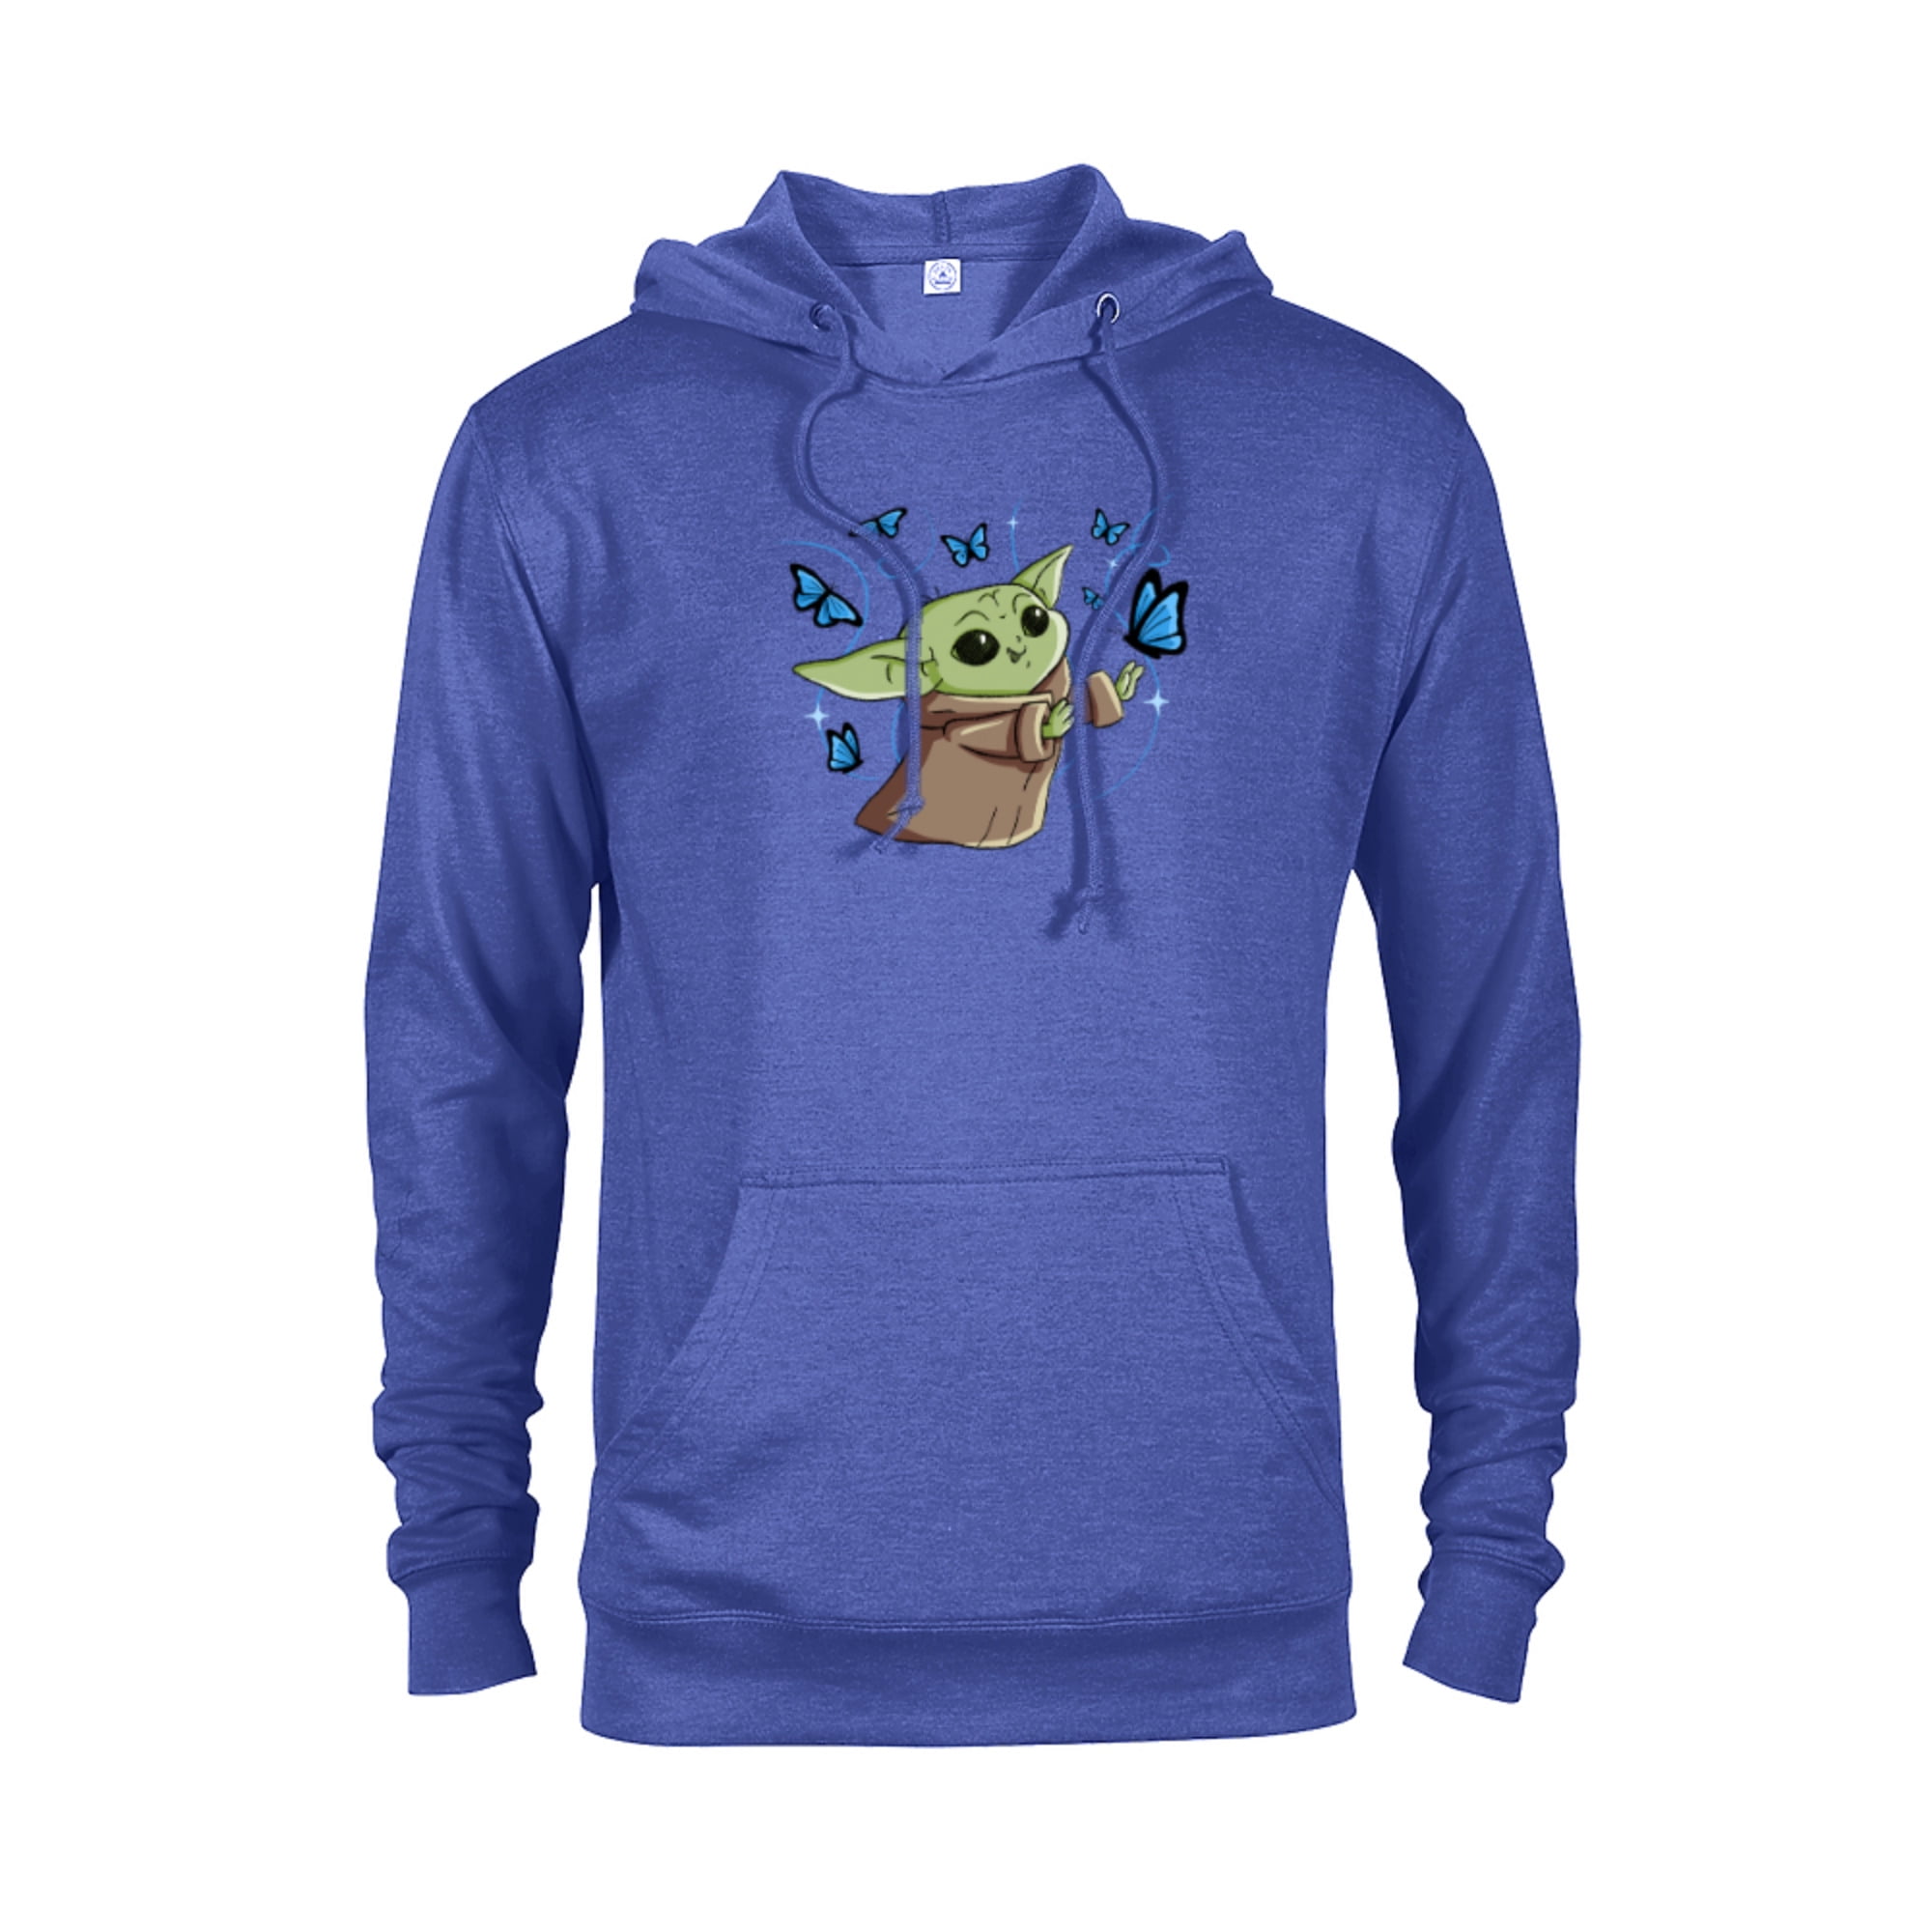 Hoodie Adults - The Child The for Customized-Royal Butterflies Mandalorian Heather Blue Wars - Pullover with Star